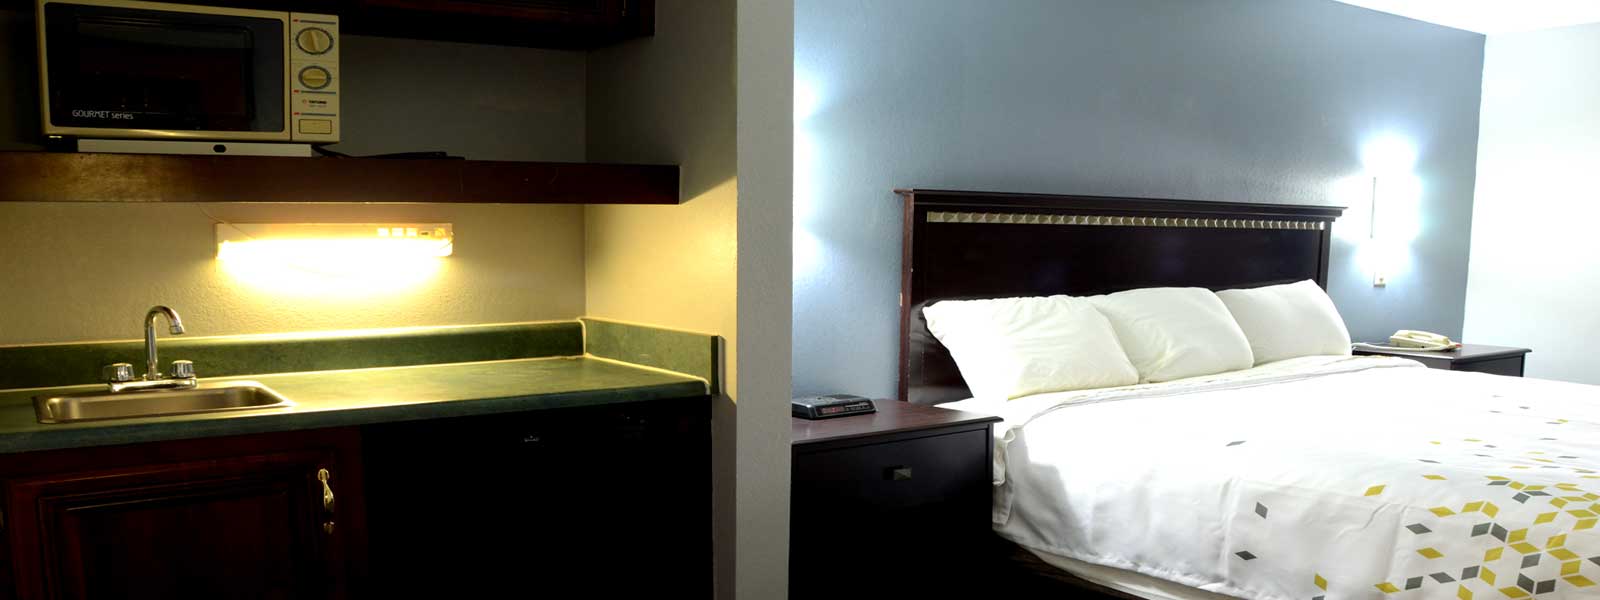 Motels in Clarksville Budget Discount 3 Star Rating 